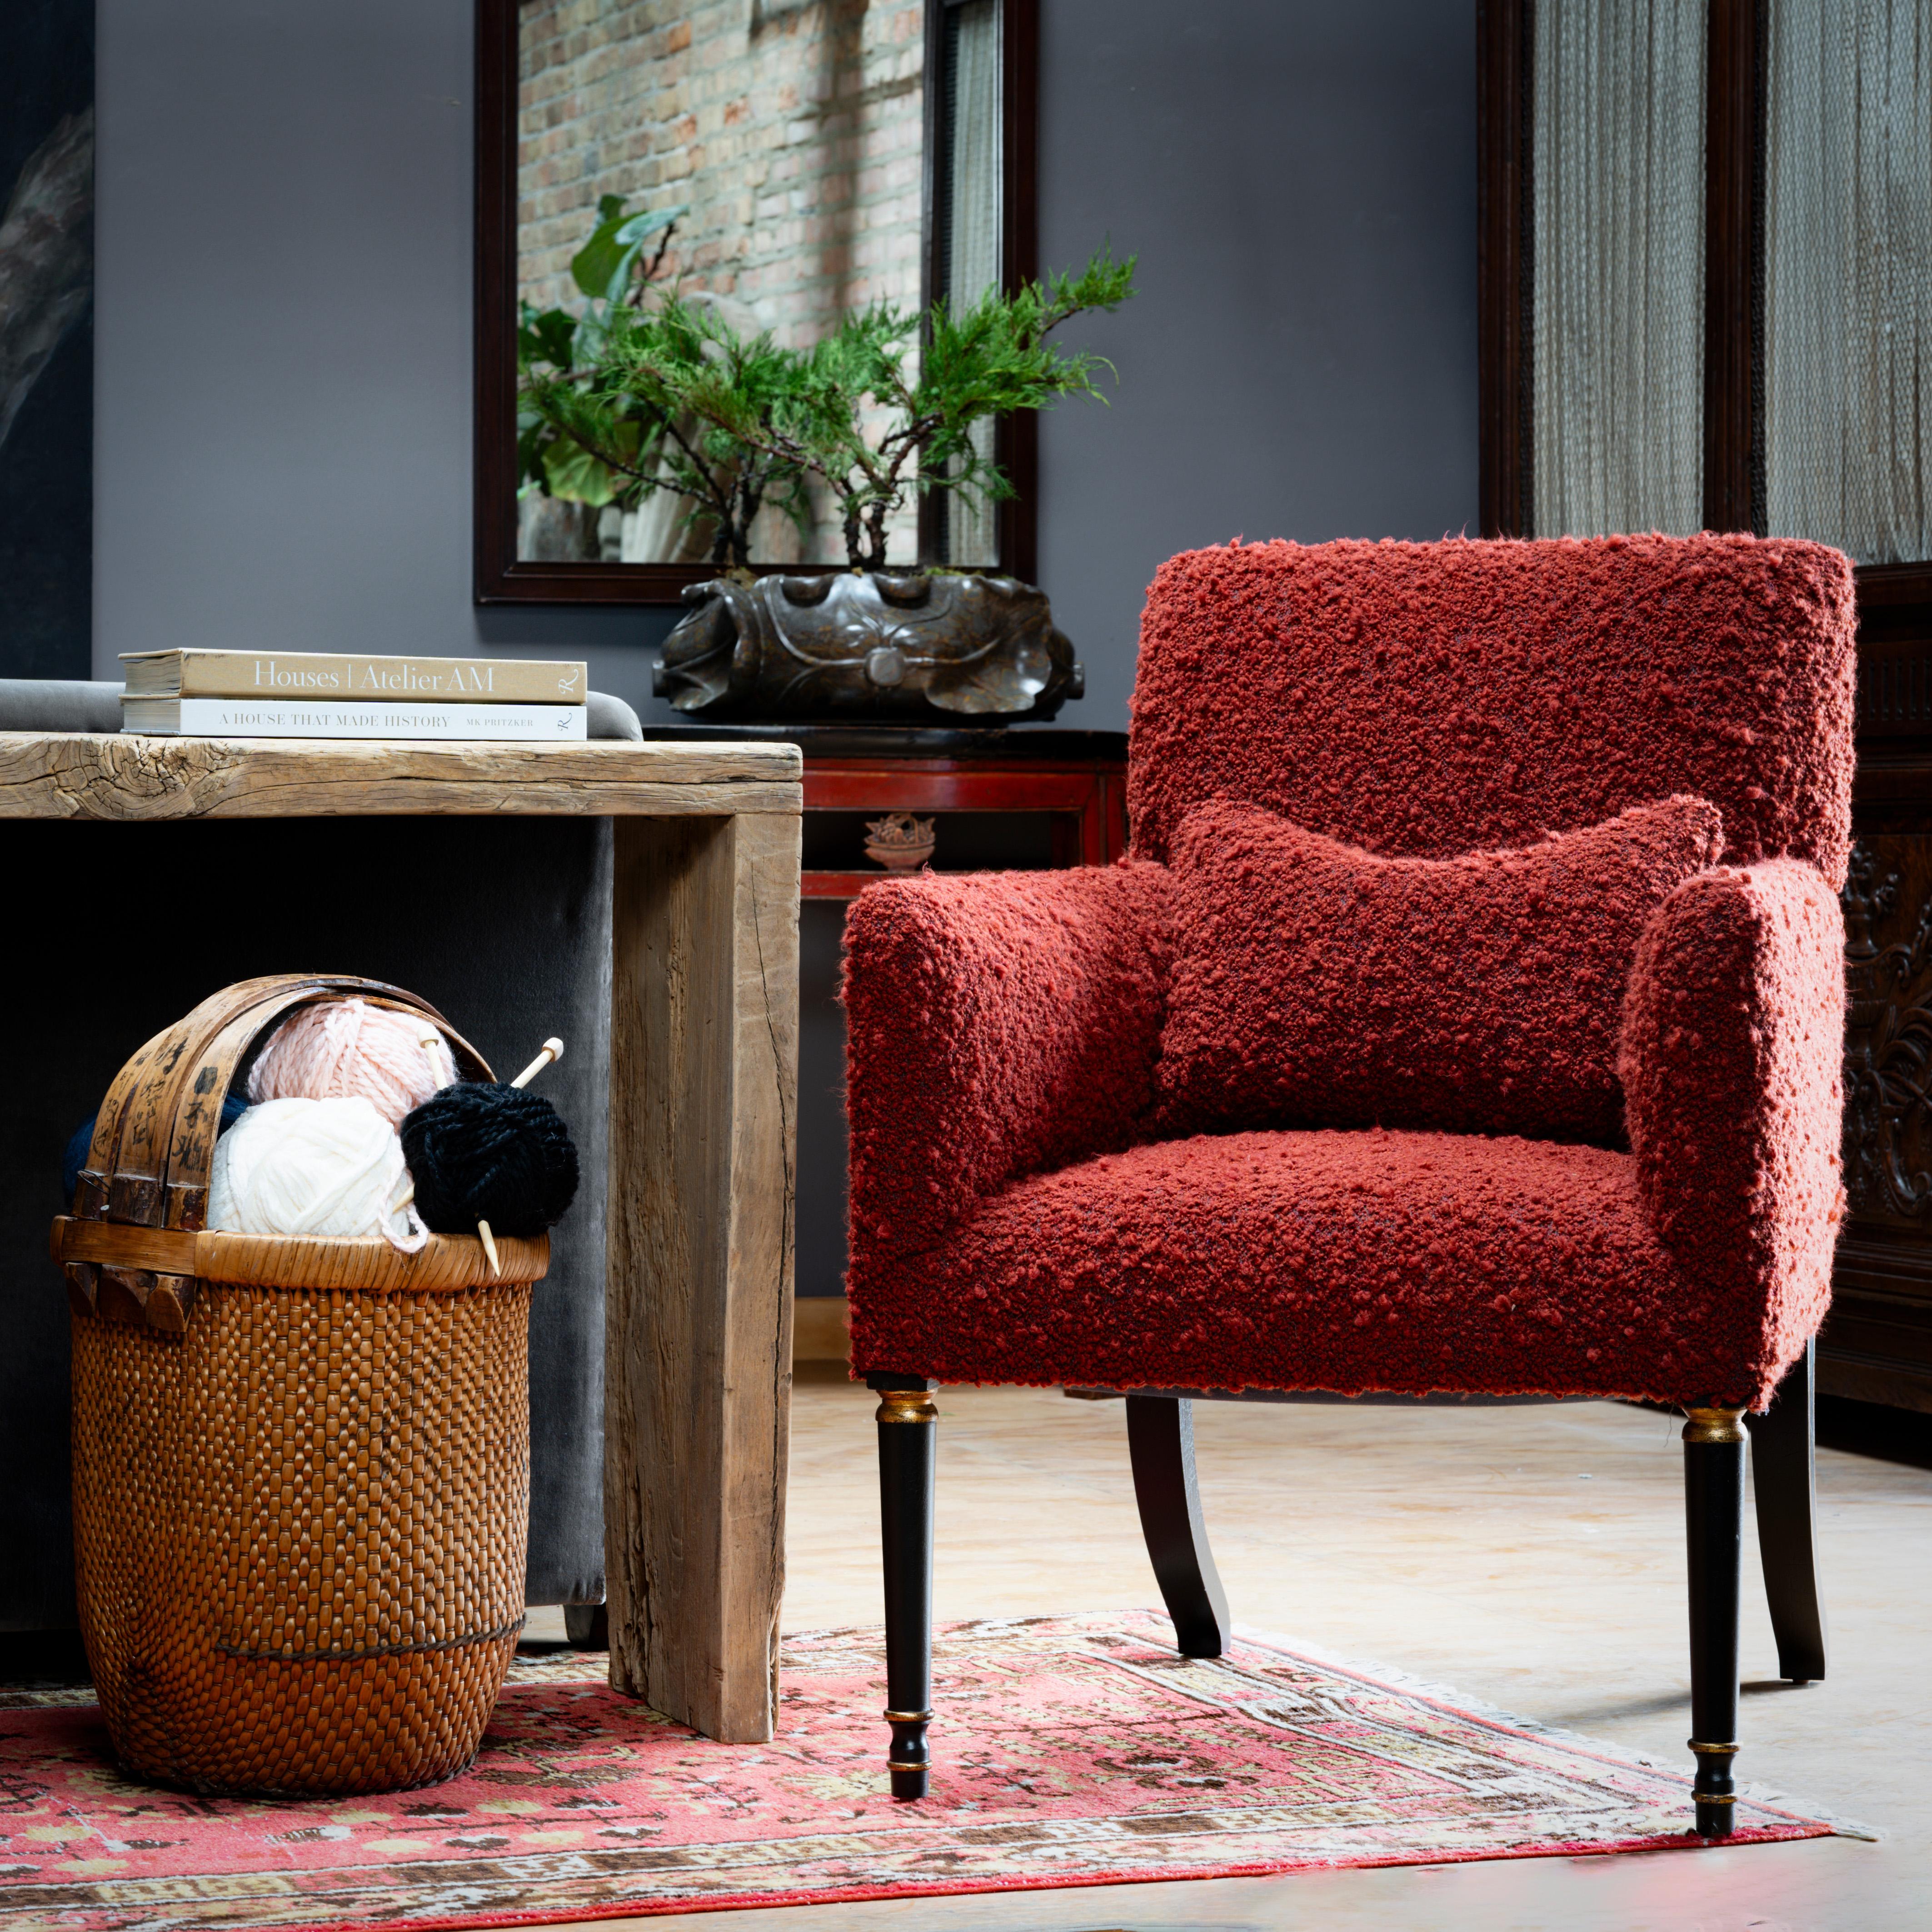 This chic and modern armchair by furniture manufacturer Dessin Fournir combines sharp lines with soft, cushioned upholstery. From Old World baroque to cutting-edge contemporary, Dessin Fournir luxury furniture celebrates timeless craftsmanship. The